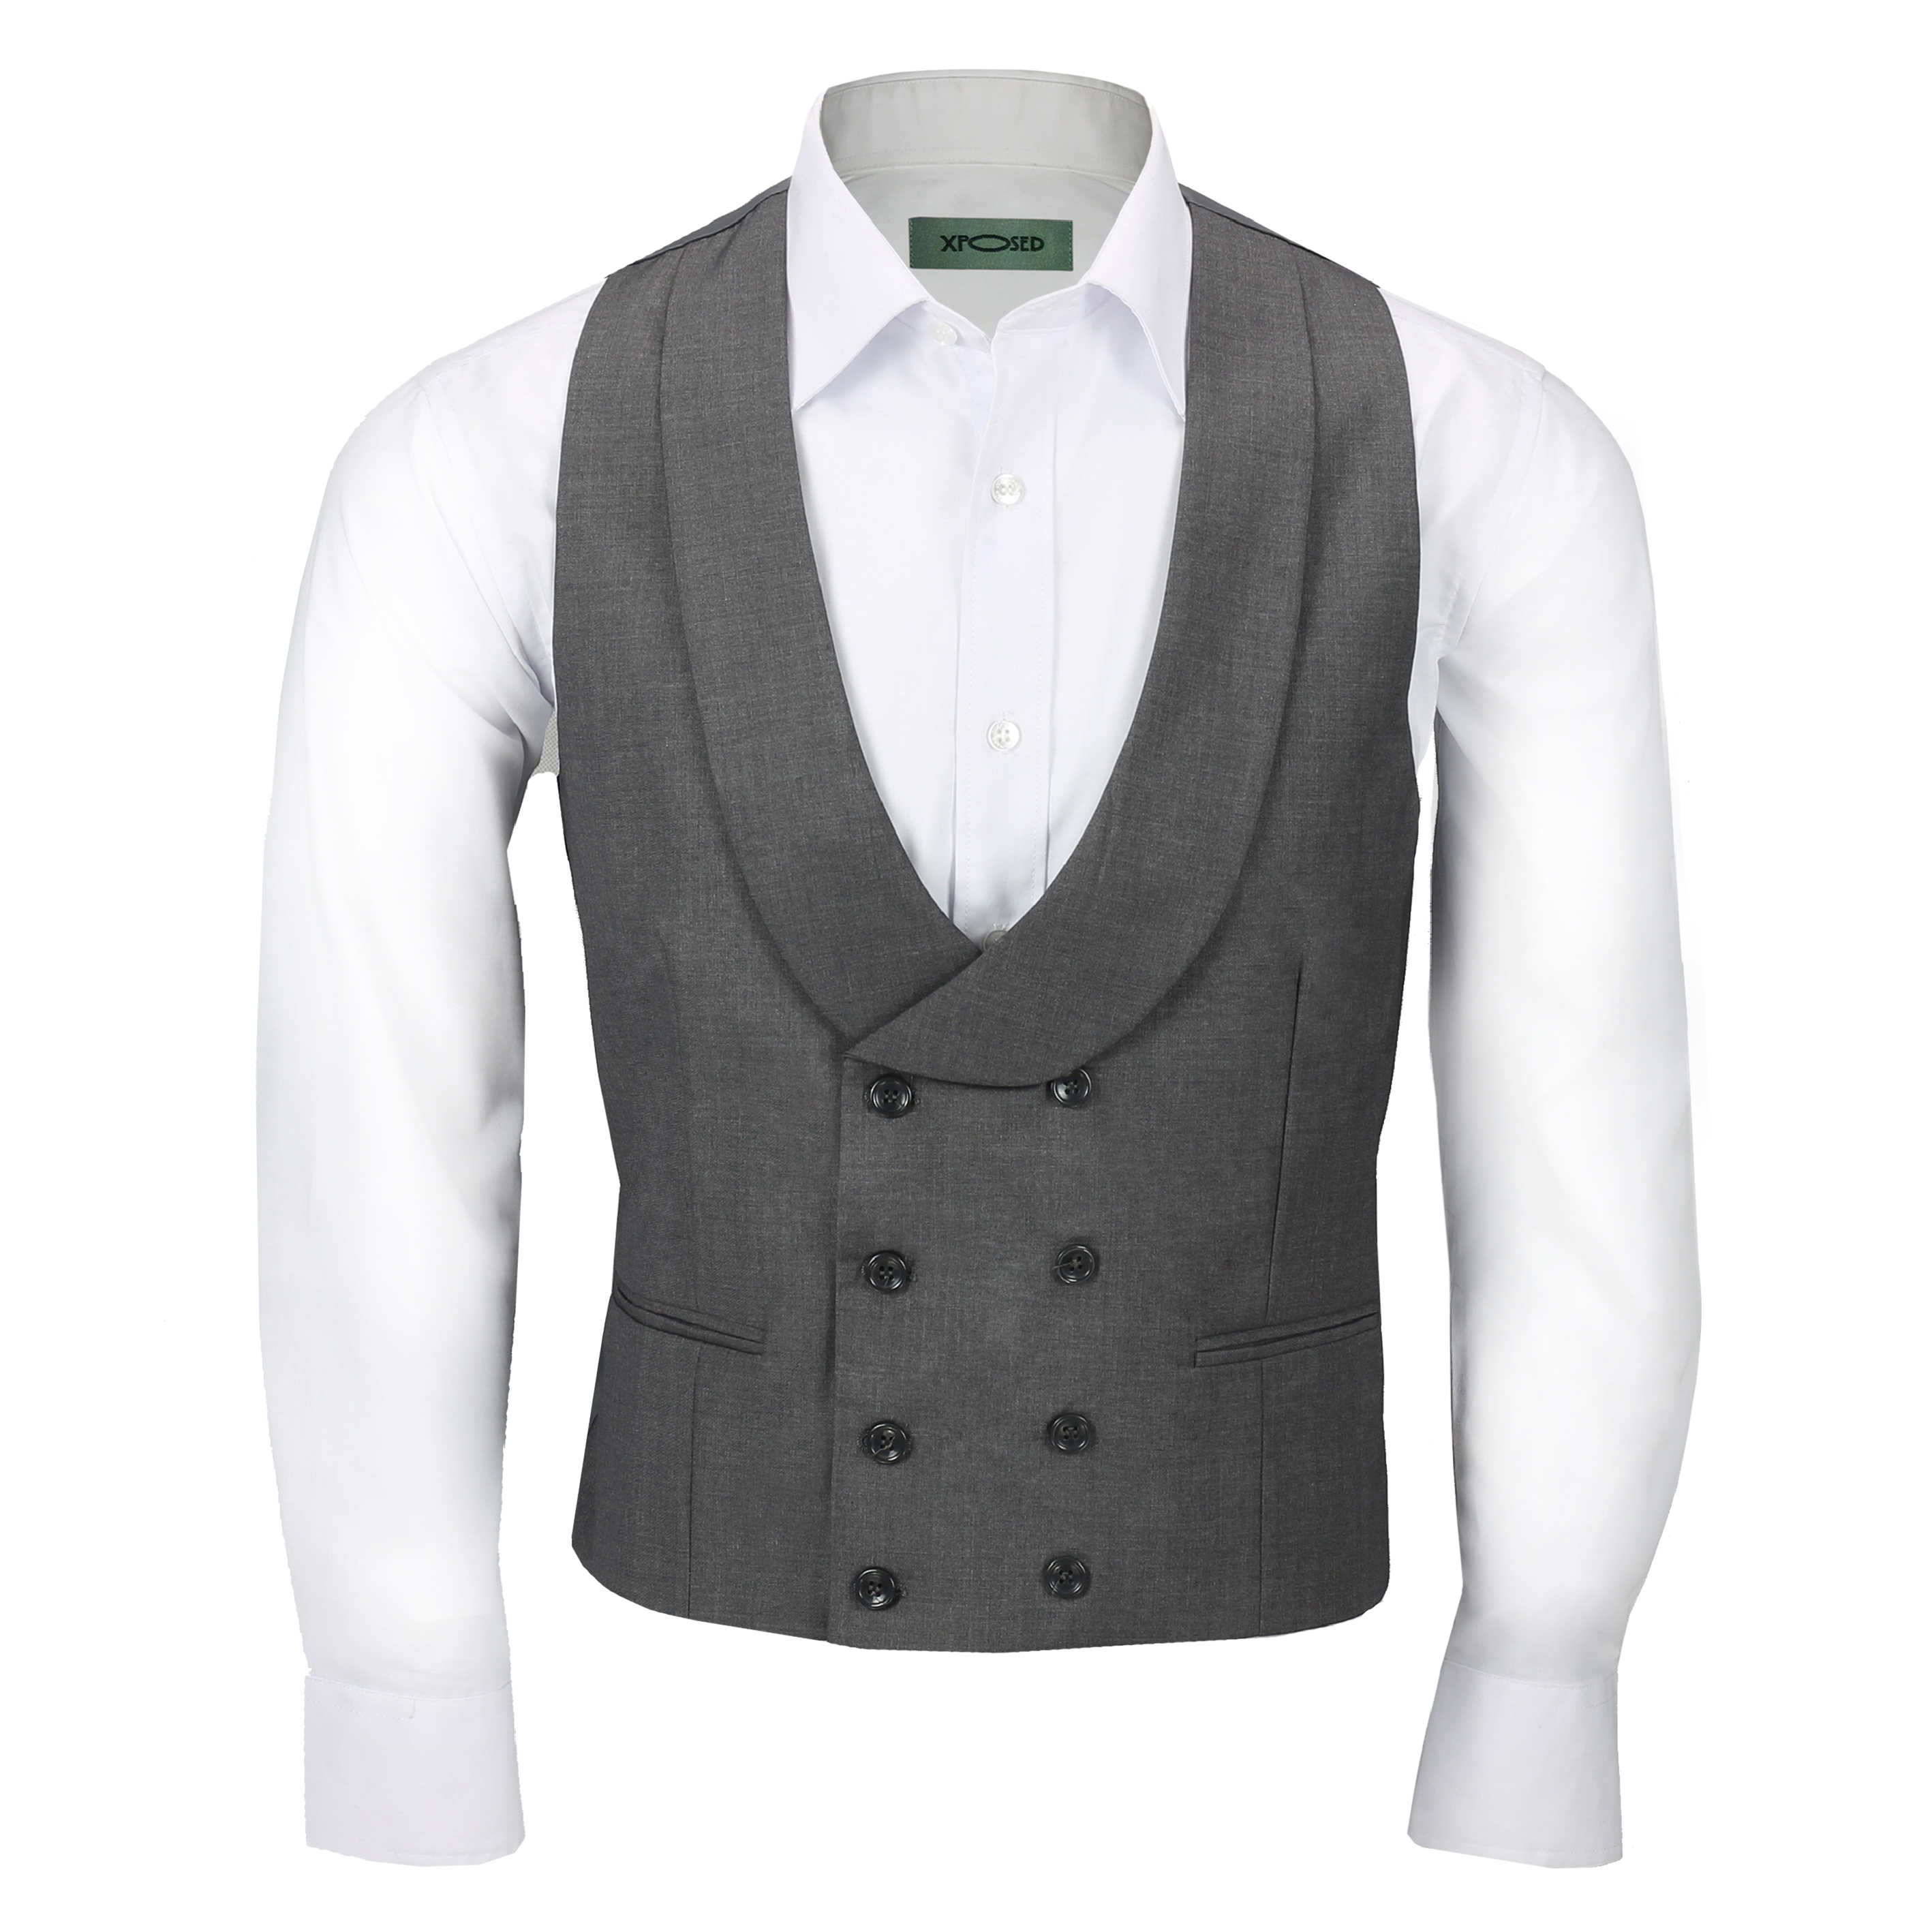 Xposed Mens Vintage Double Breasted Collar Waistcoat Retro Peak Lapel Tailored Fit Smart Casual Vest CWC-1-318-212-GREY,Chest UK 42 EU 52,Grey